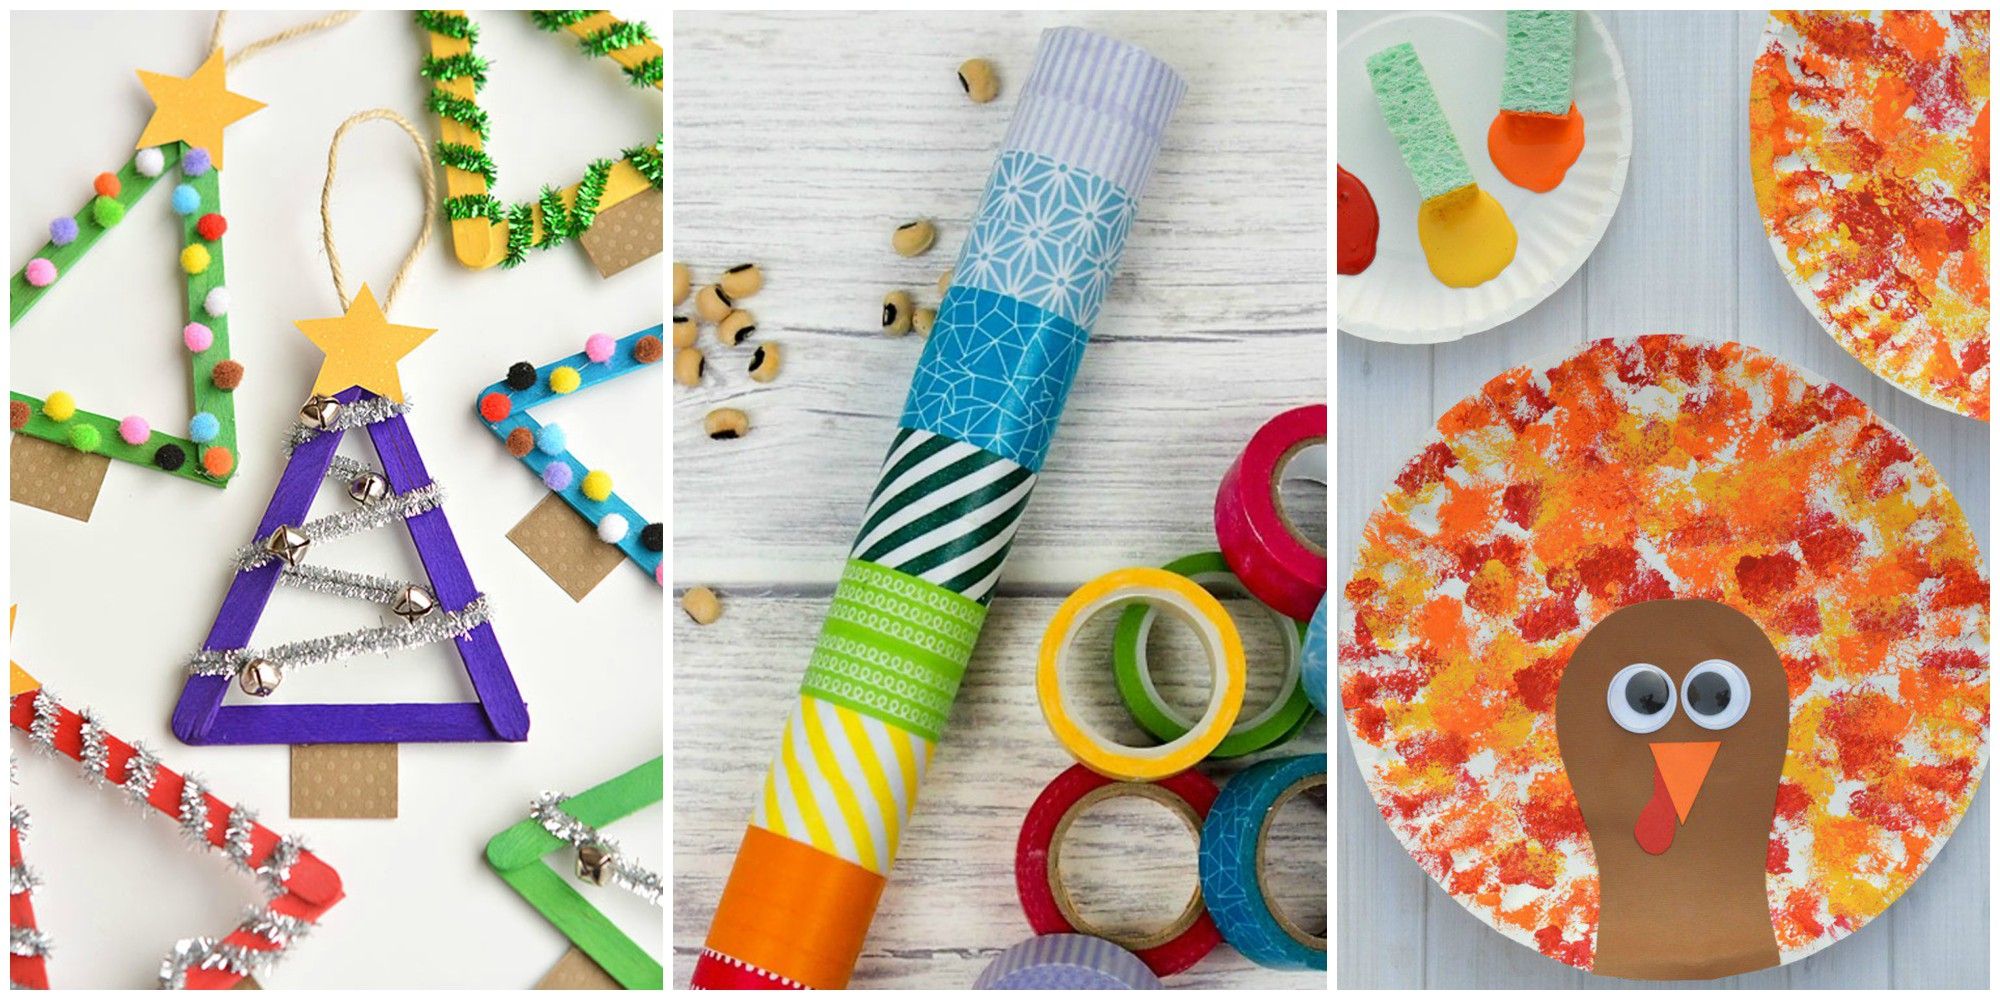 10 Easy Crafts For Toddlers -Arts and Crafts Ideas for Toddlers